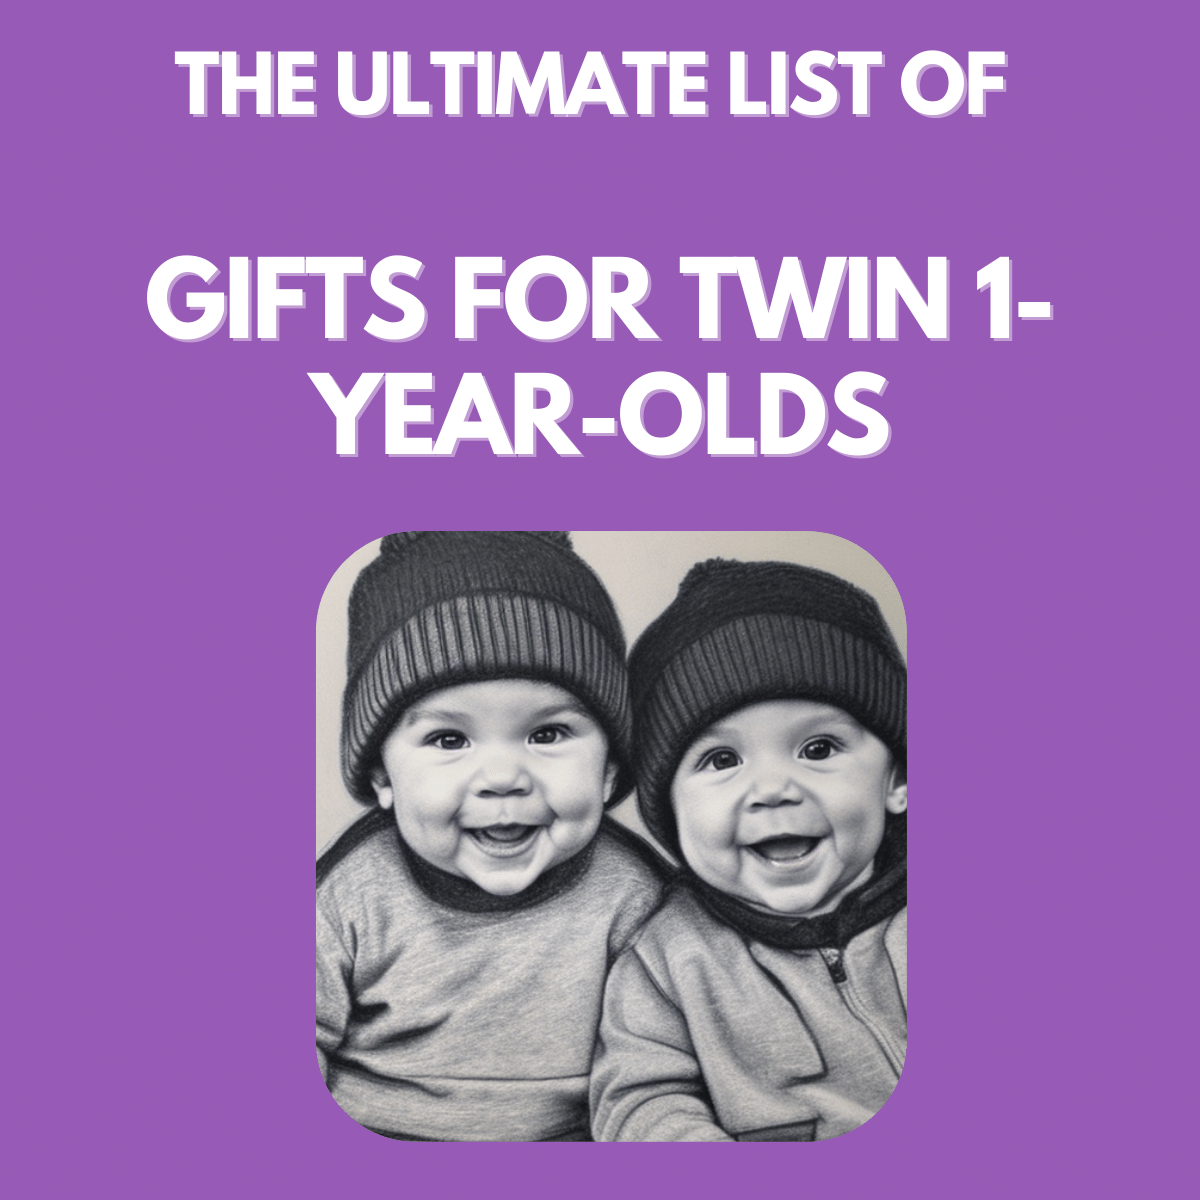 The Ultimate List Of Gifts For Twin 1-Year-Olds